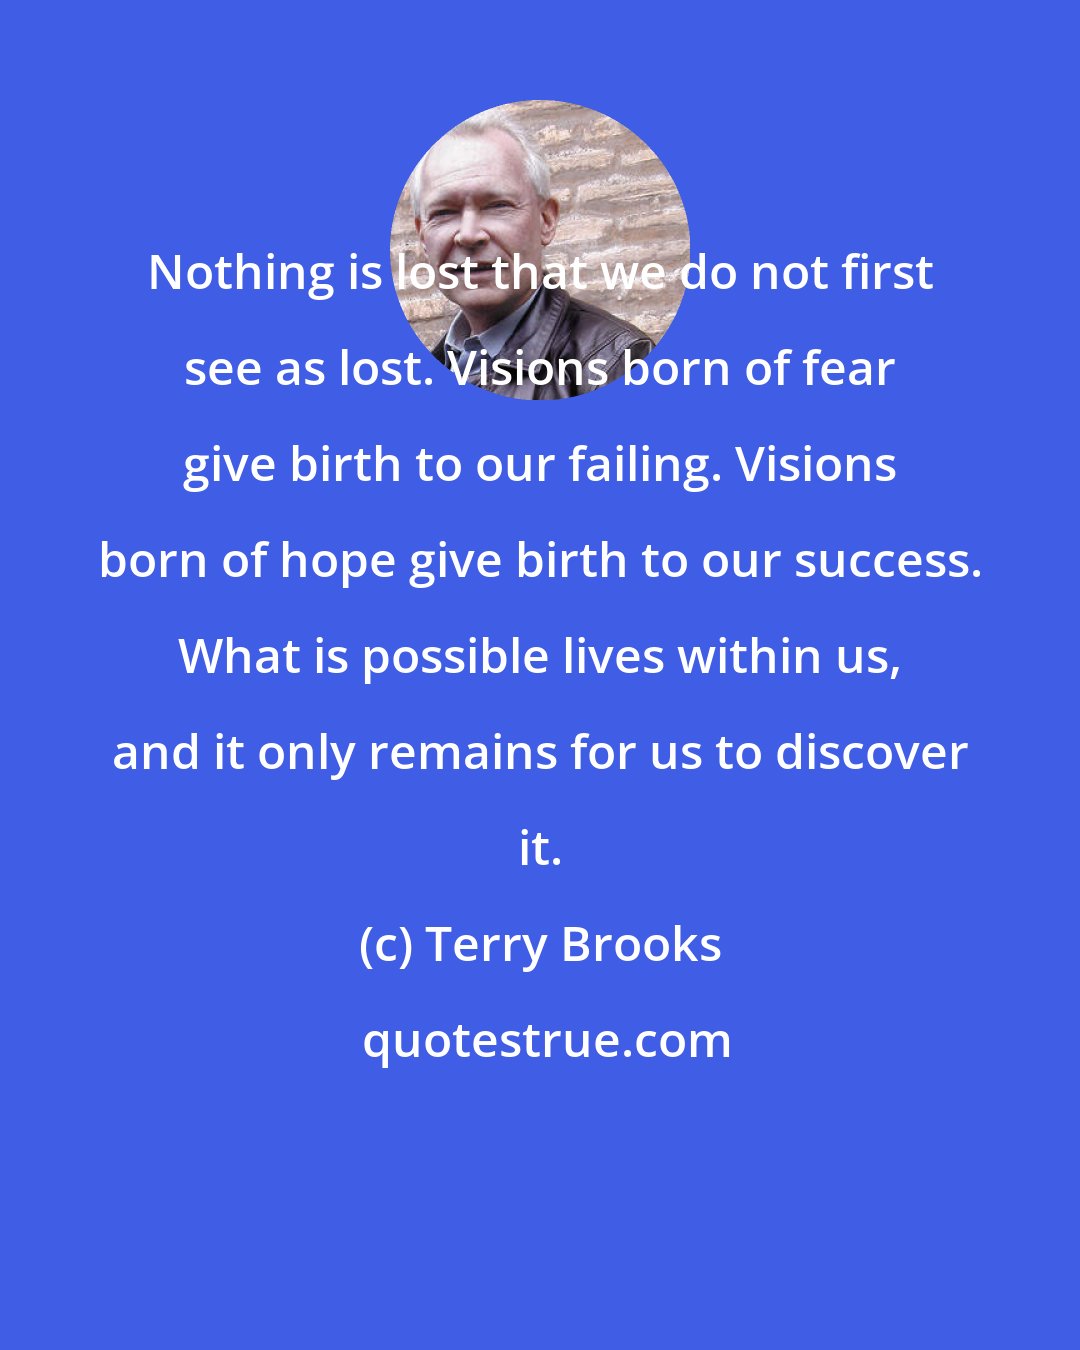 Terry Brooks: Nothing is lost that we do not first see as lost. Visions born of fear give birth to our failing. Visions born of hope give birth to our success. What is possible lives within us, and it only remains for us to discover it.